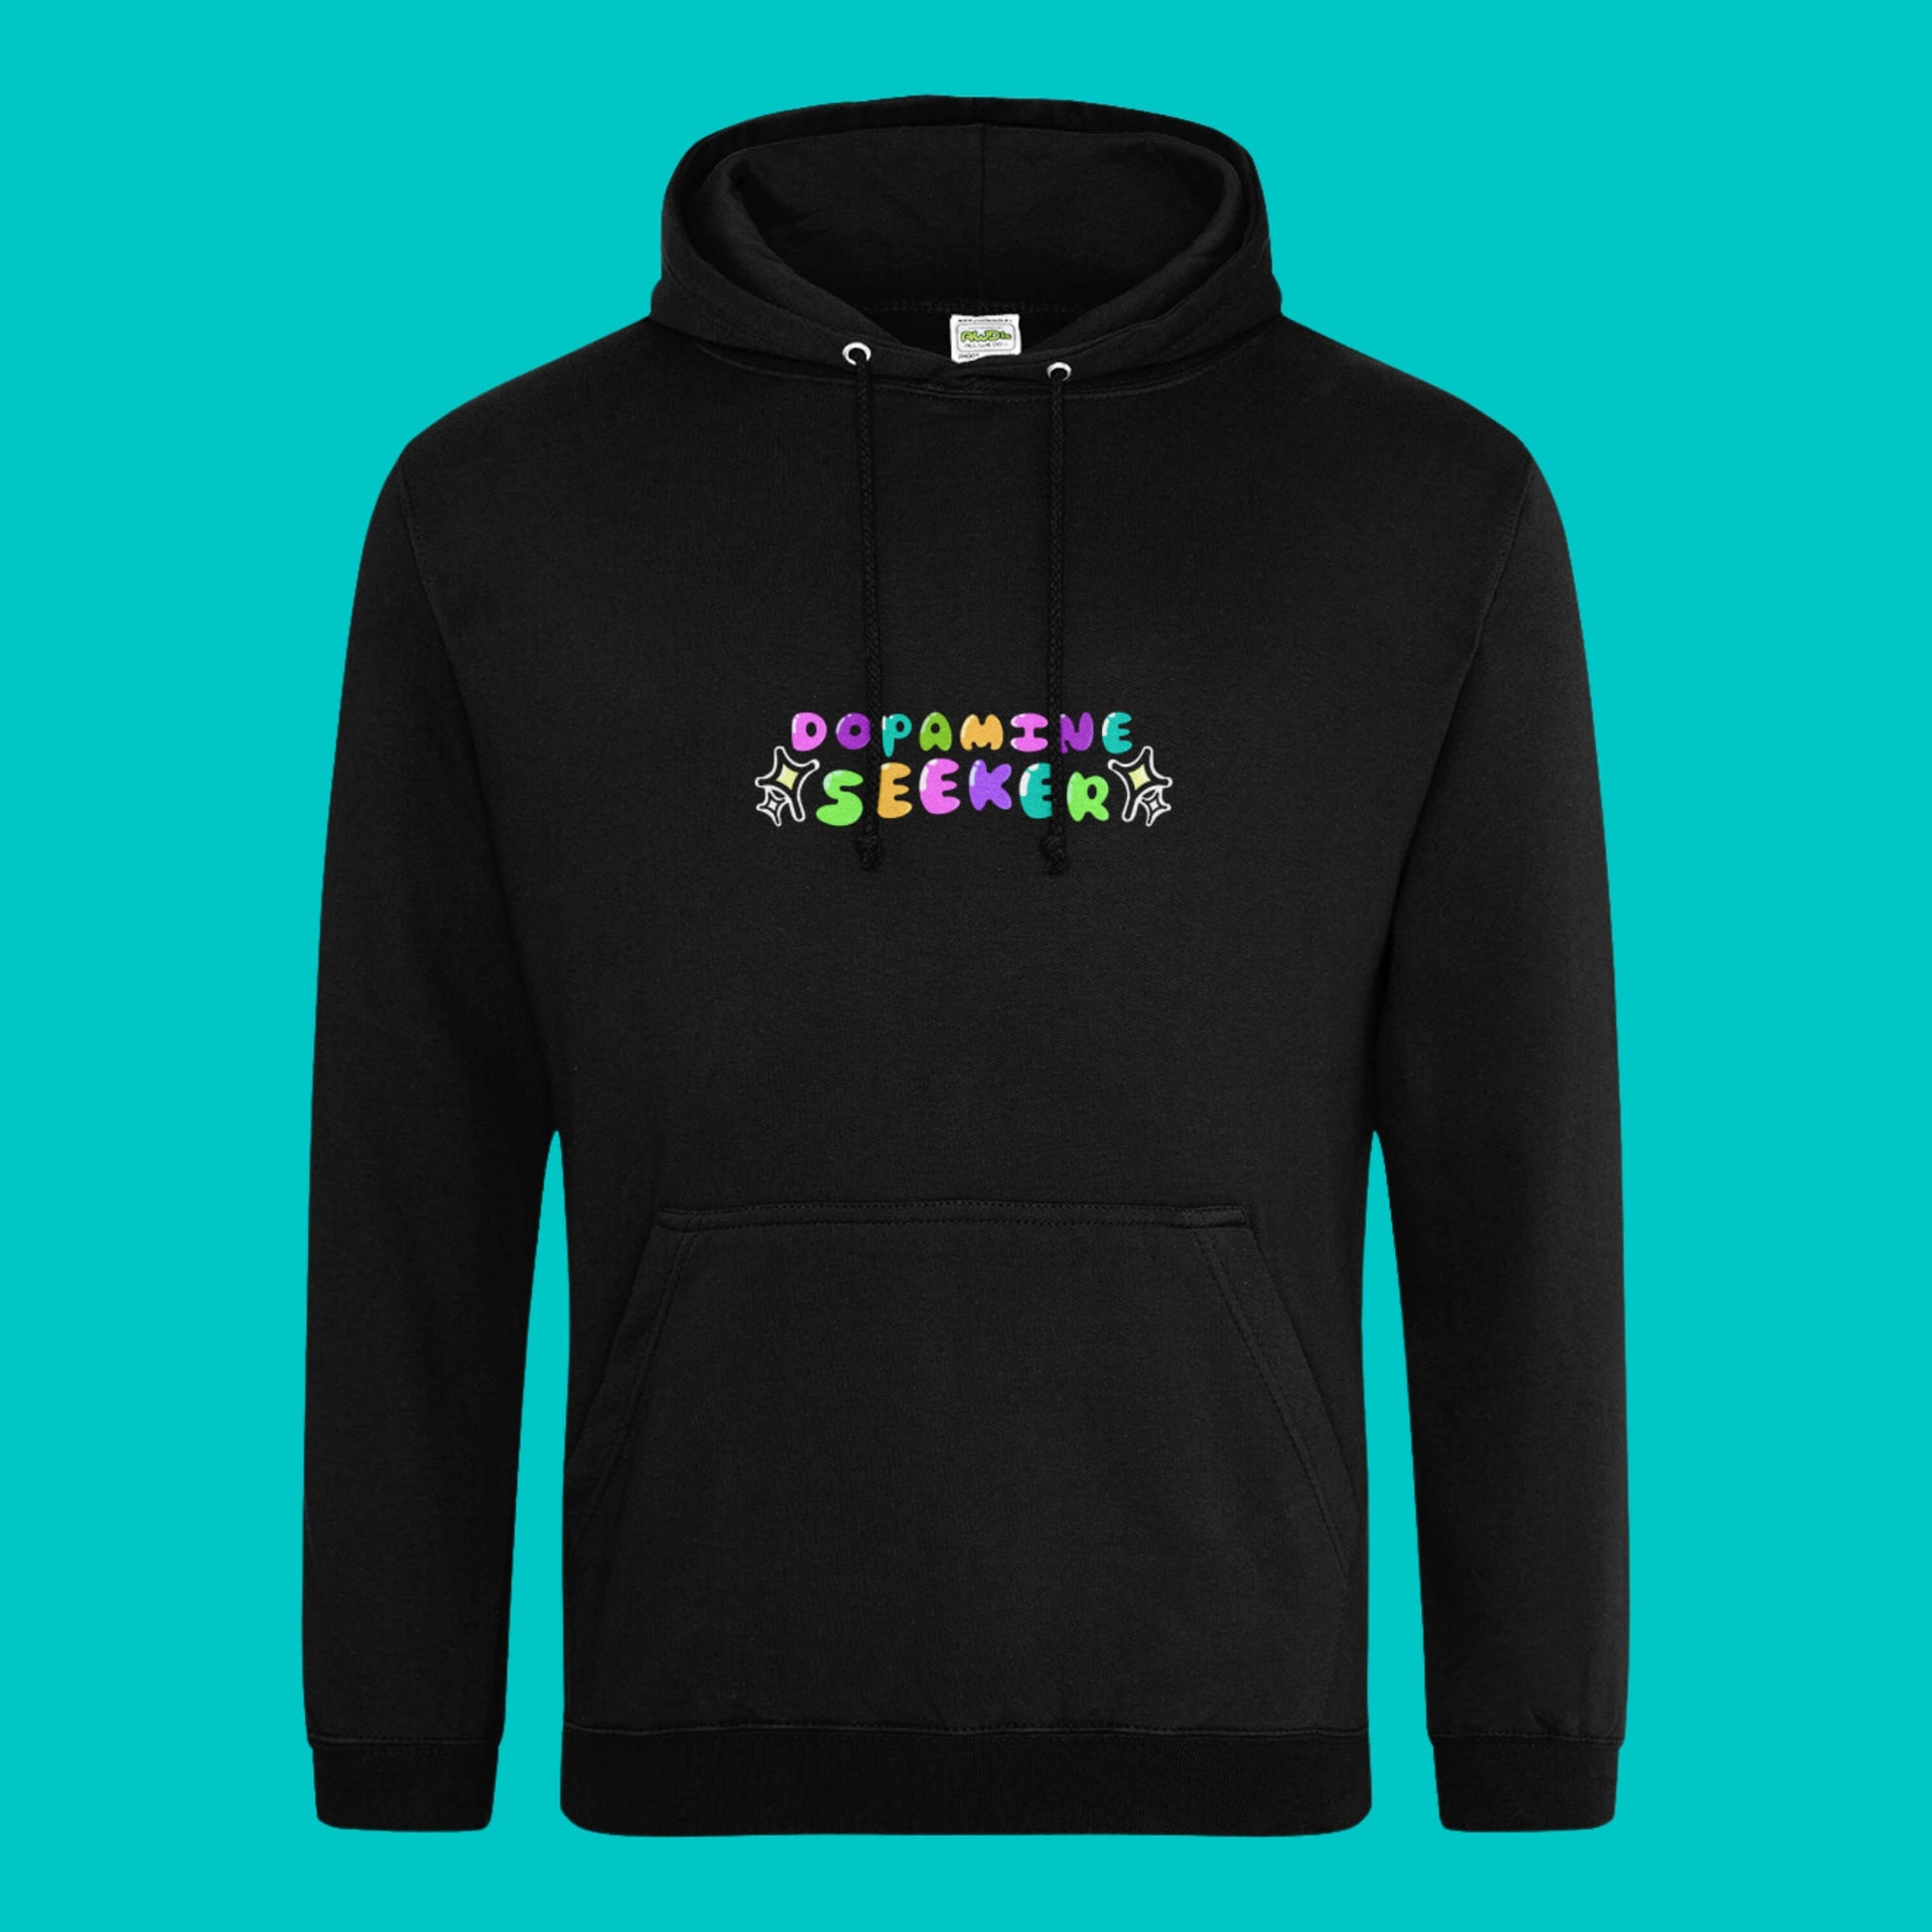 The Dopamine Seeker Black Hoodie on a blue background. The black cotton hoodie features centre rainbow bubble text that reads 'dopamine seeker' with yellow and black sparkles surrounding it. The hoodie has black drawstrings and a large centre pocket. The hoodie was designed to raise awareness for ADHD and neurodivergence.